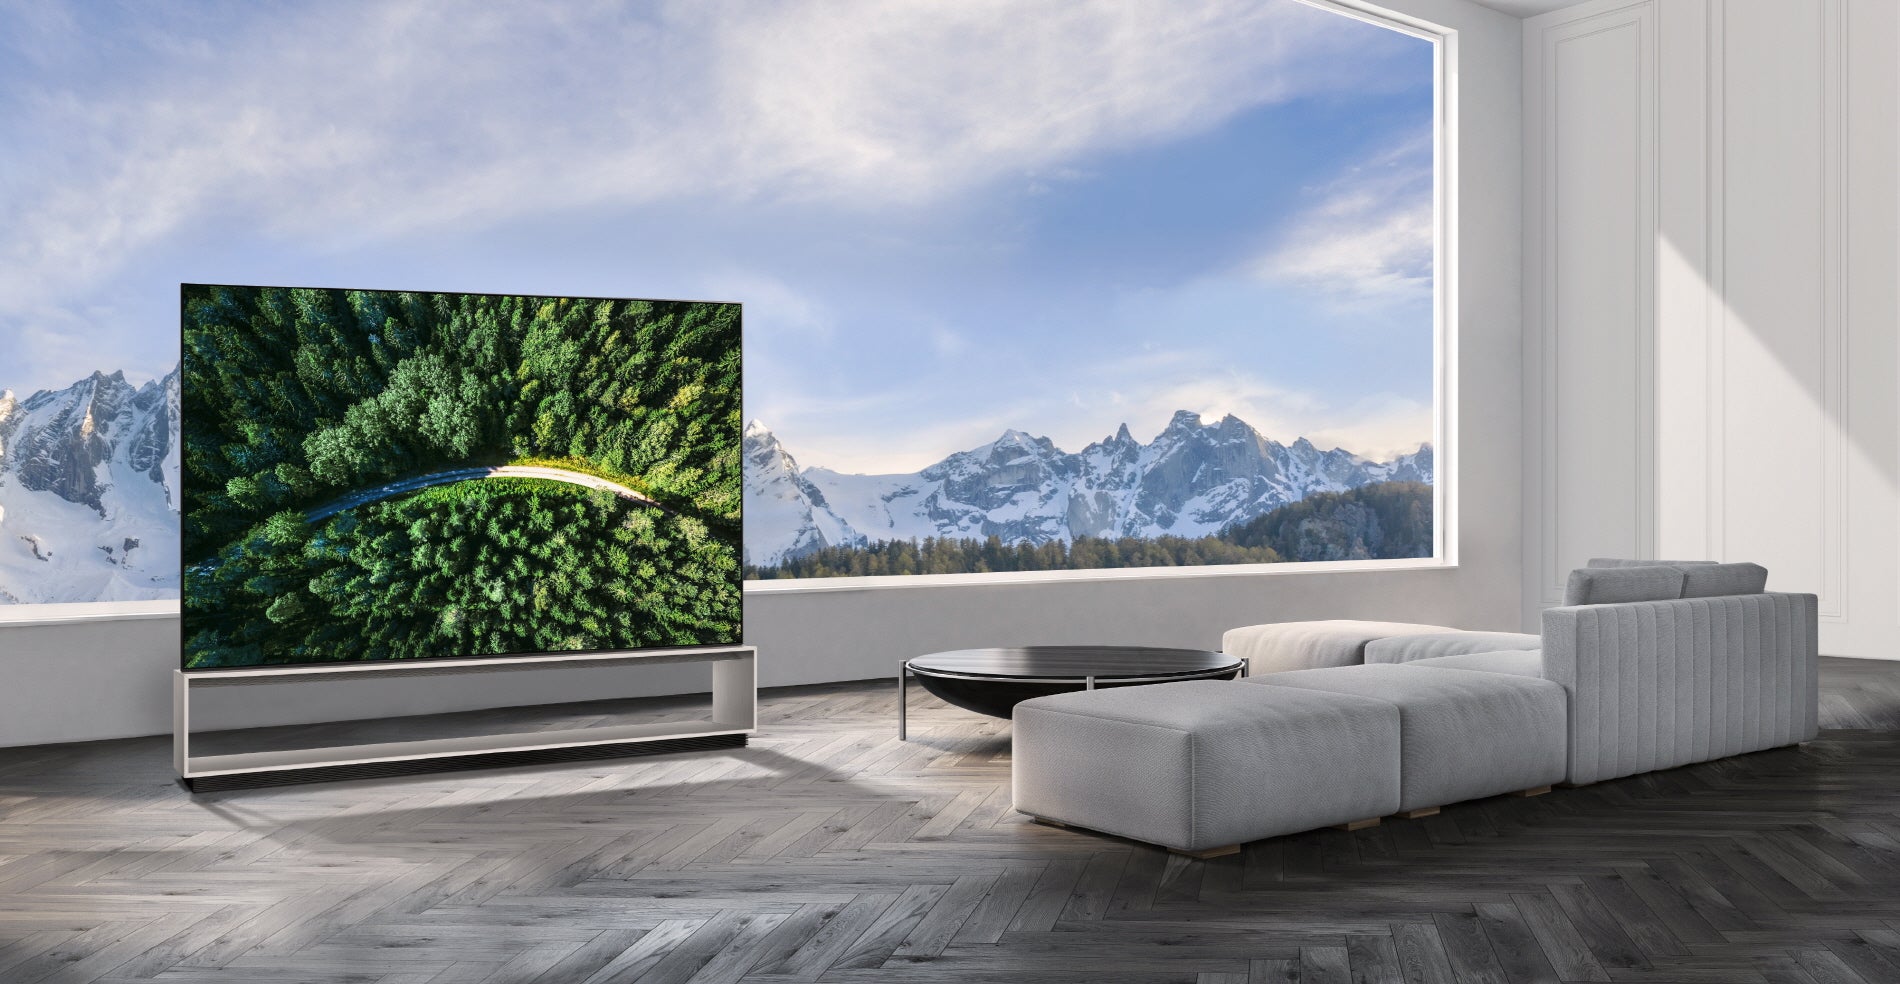 LG has unveiled two new 8K TVs – including the world's first 8K OLED TV